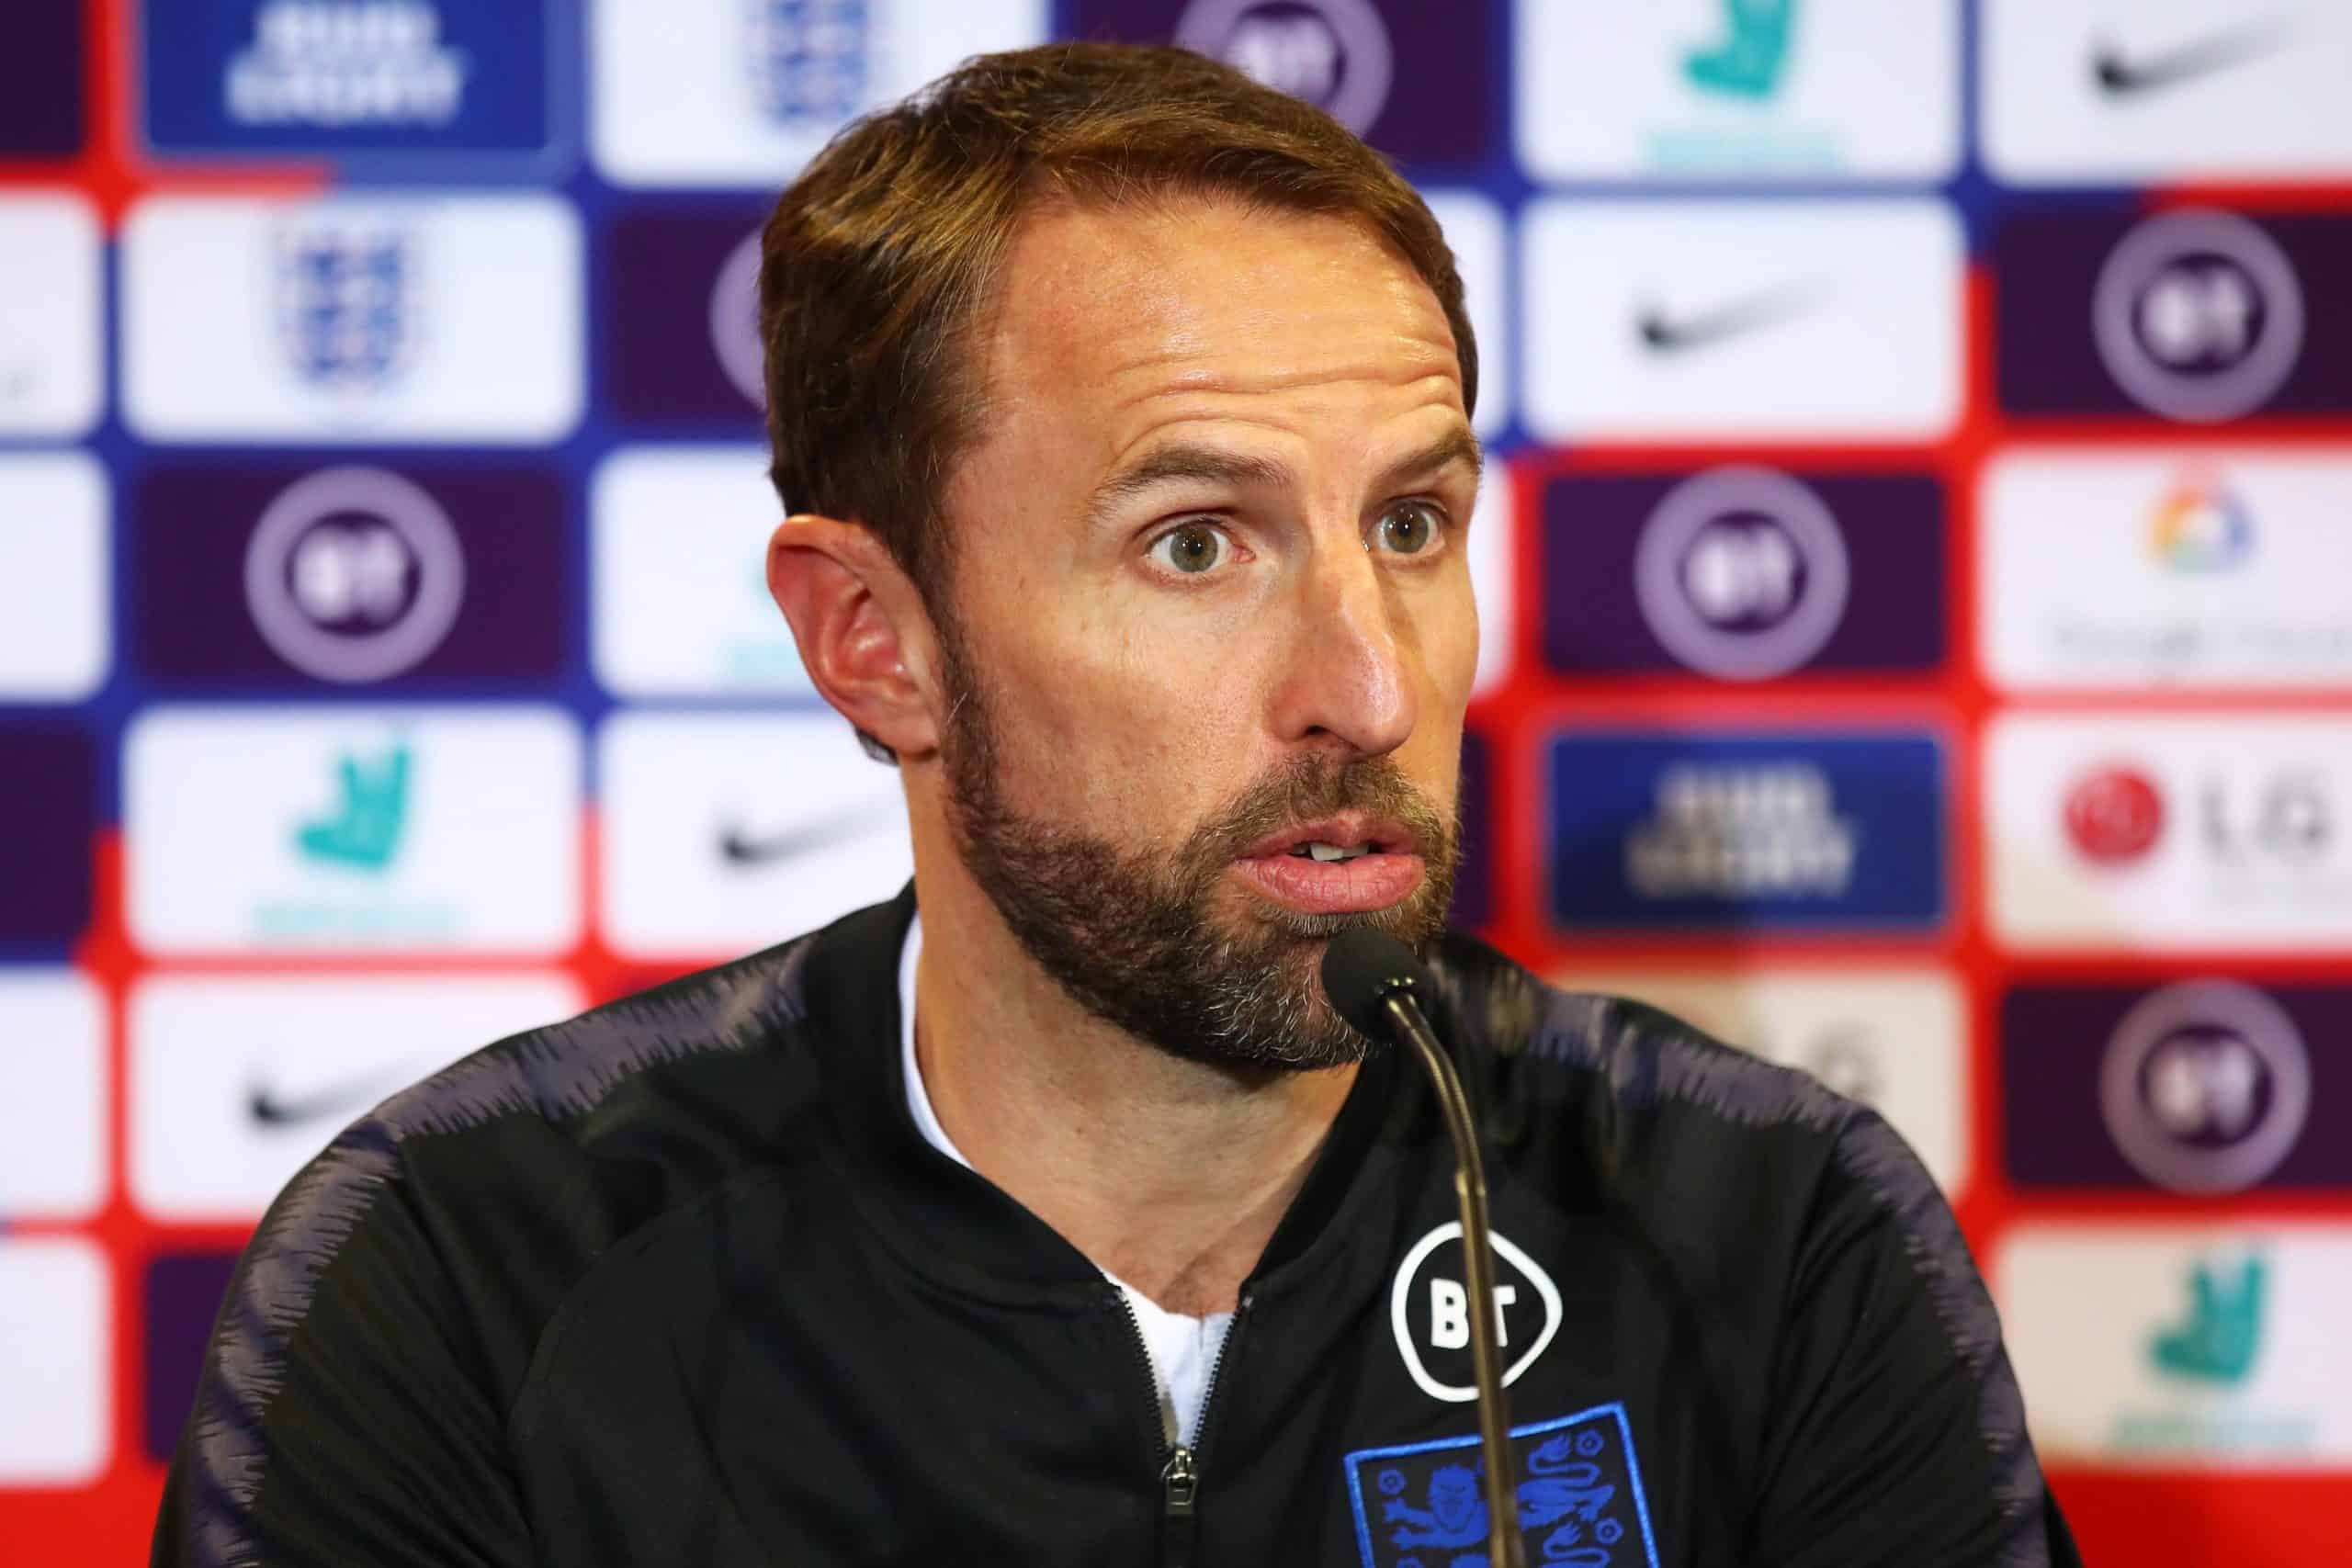 You are currently viewing ‘No benefit’ to World Cup boycott over human rights – Southgate